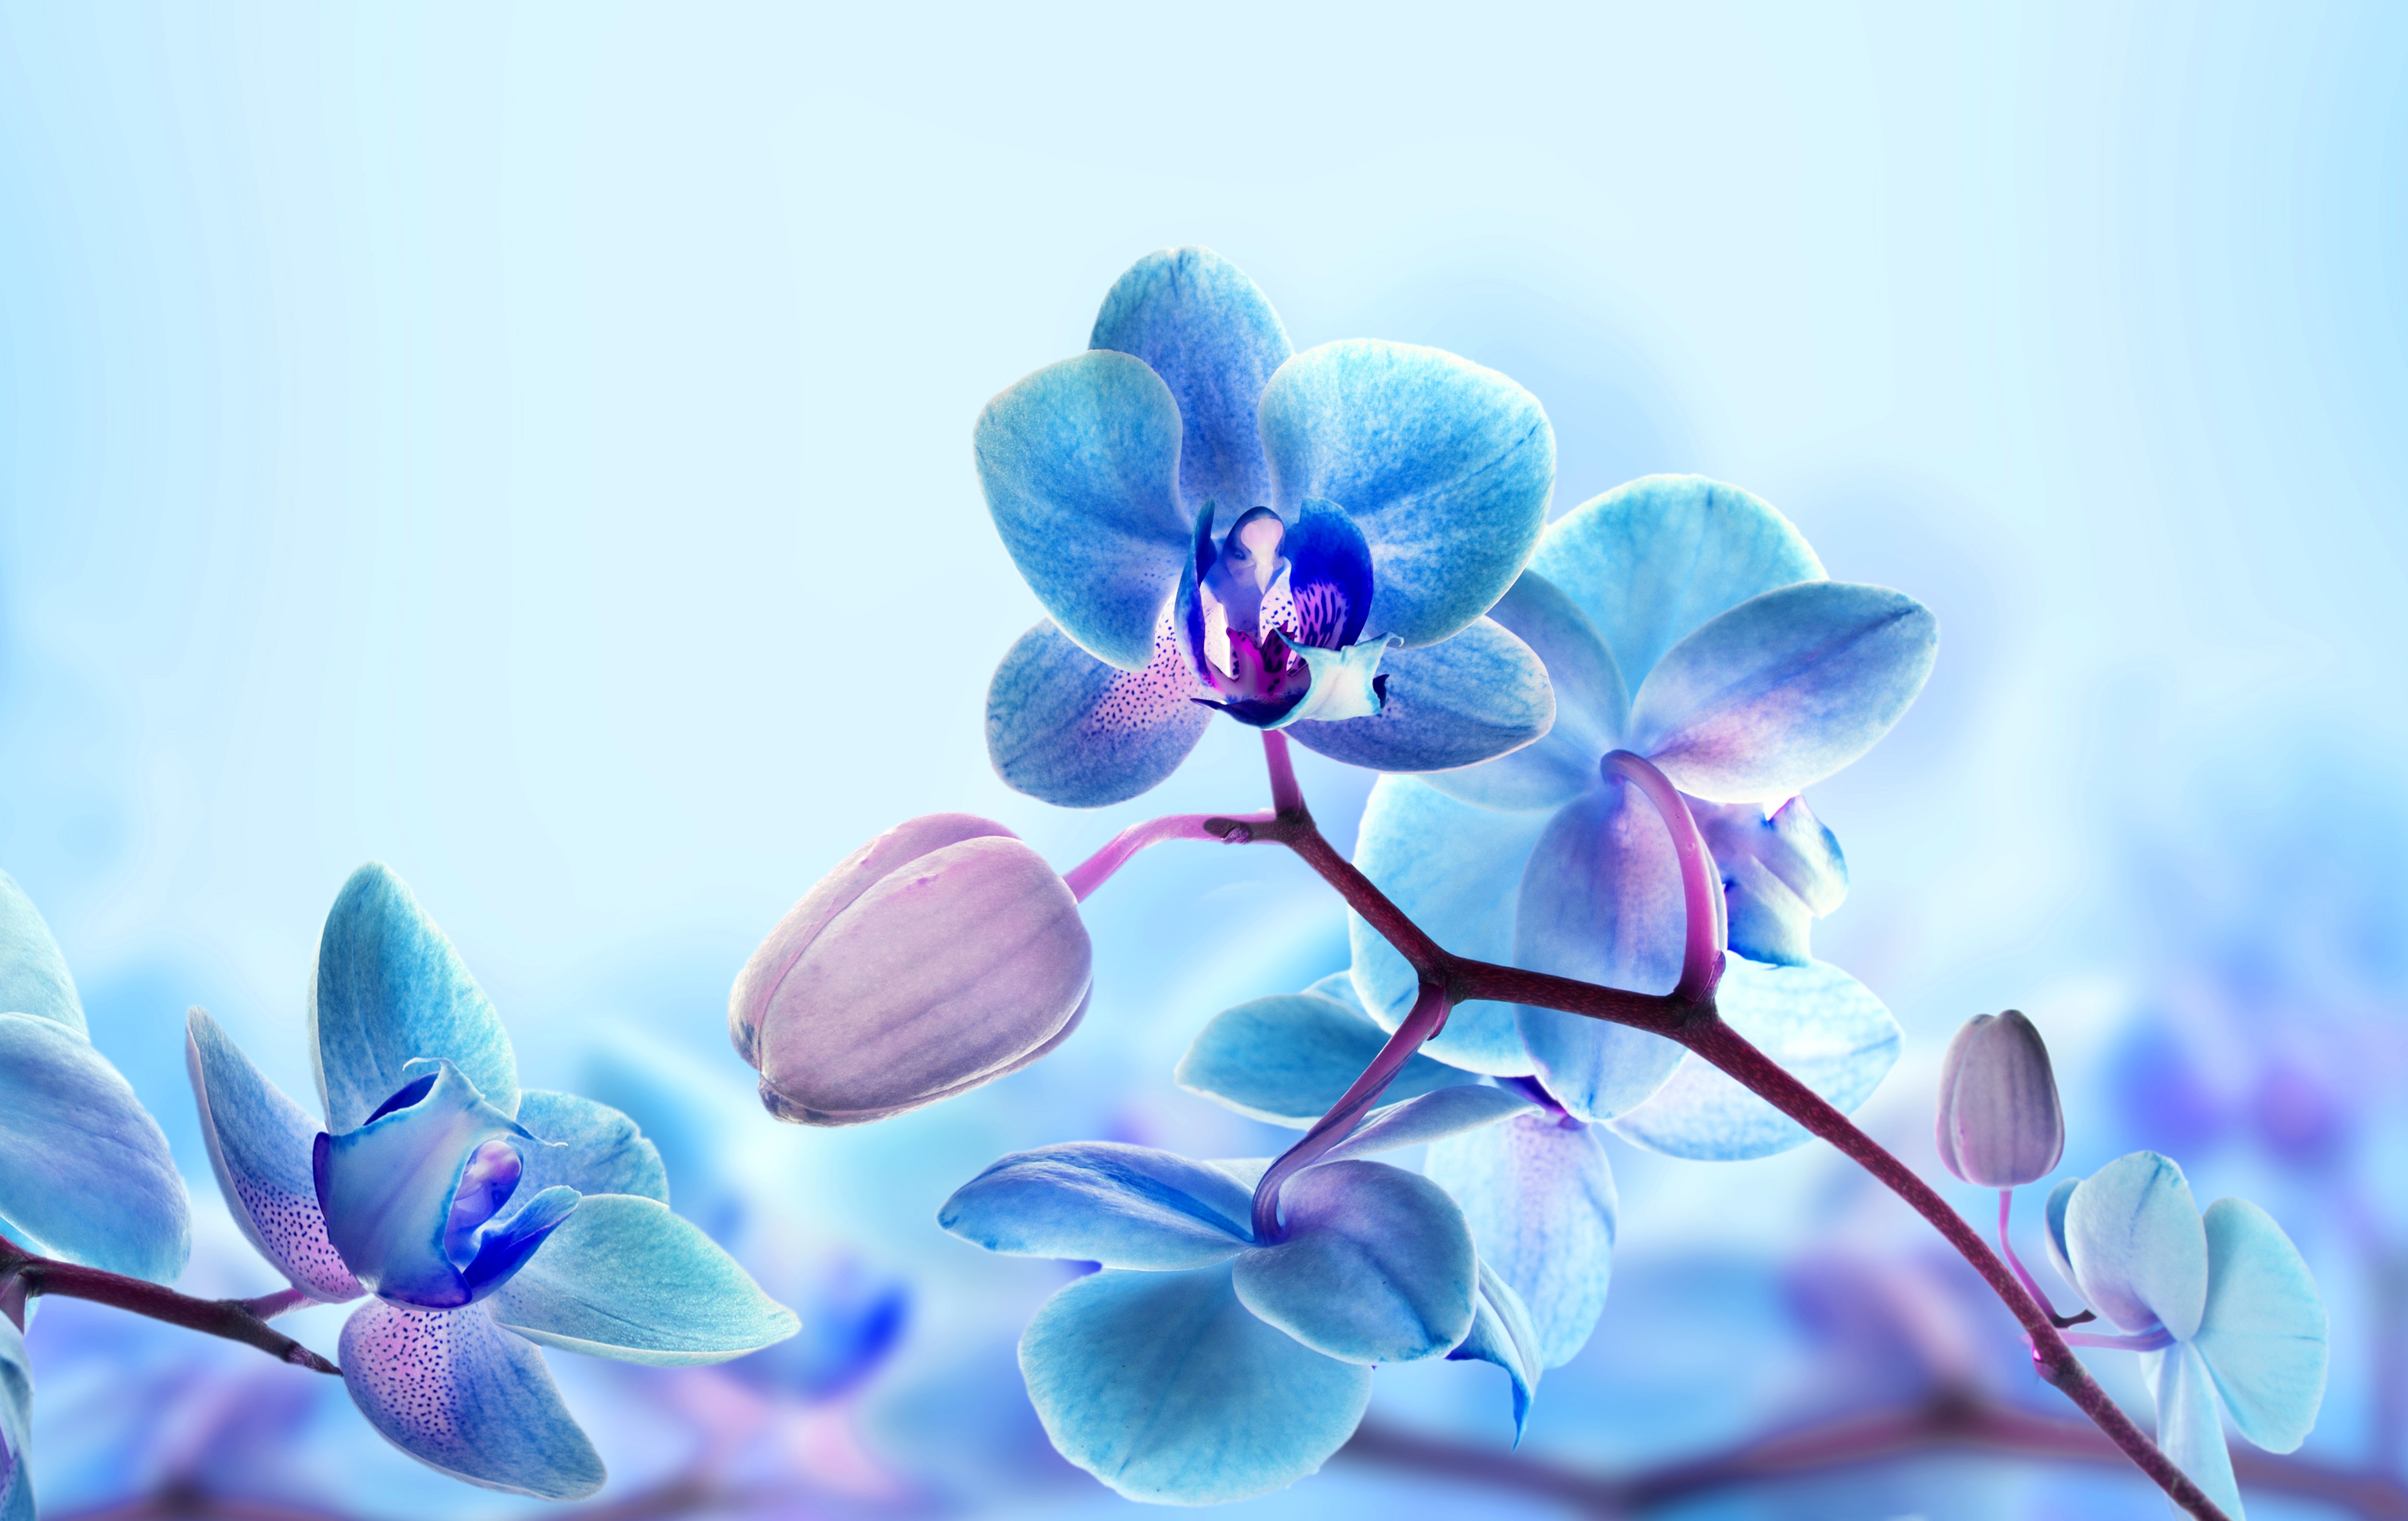 Blue Orchid Wallpaper Image Photo Picture Background